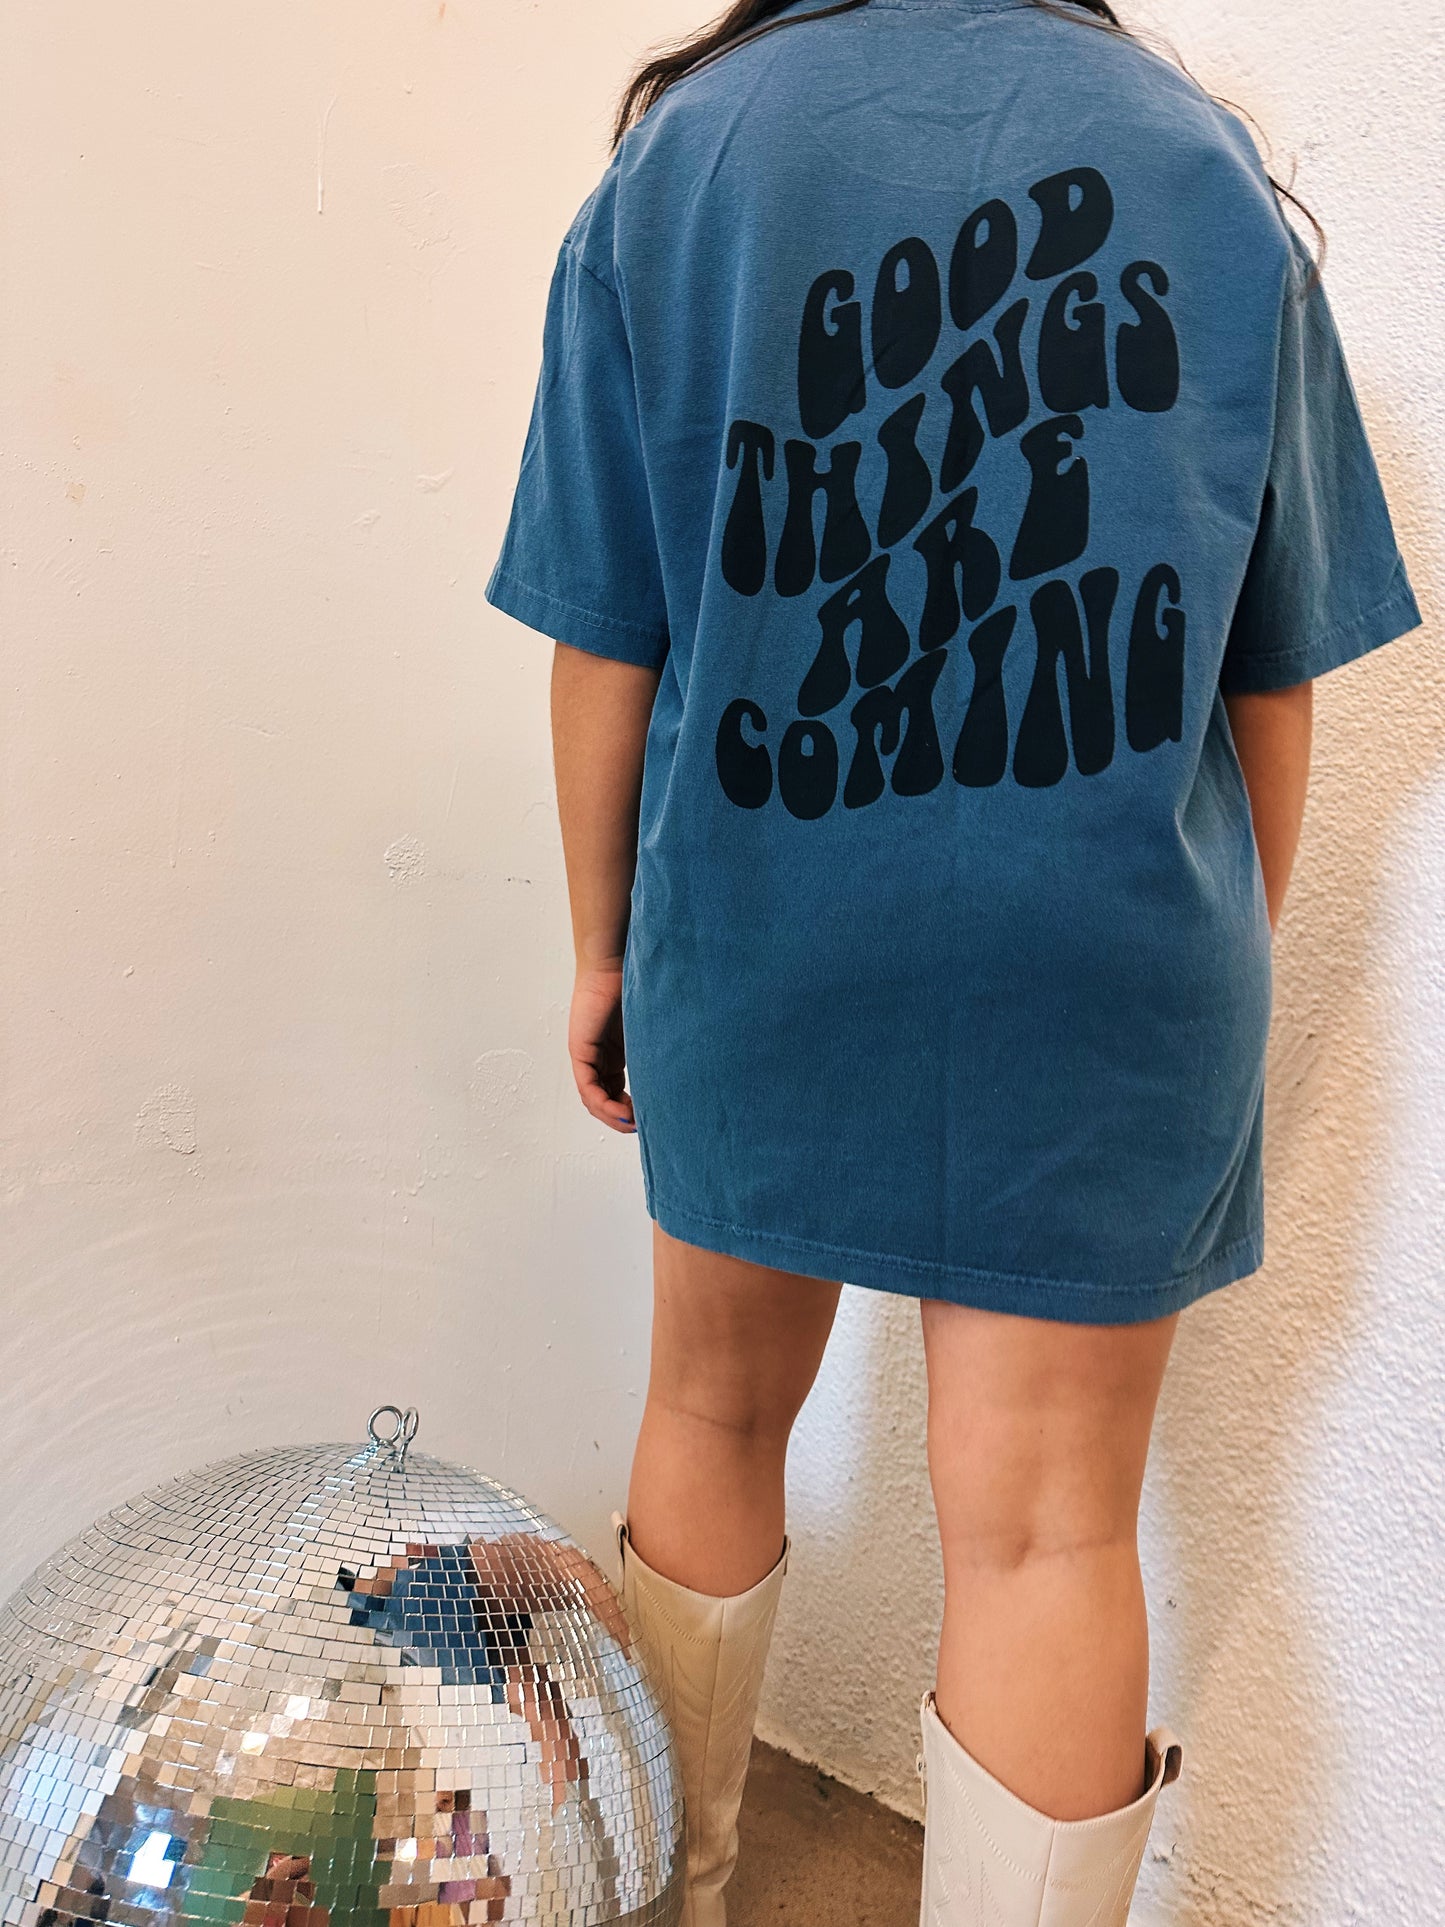 good things are coming oversized tee